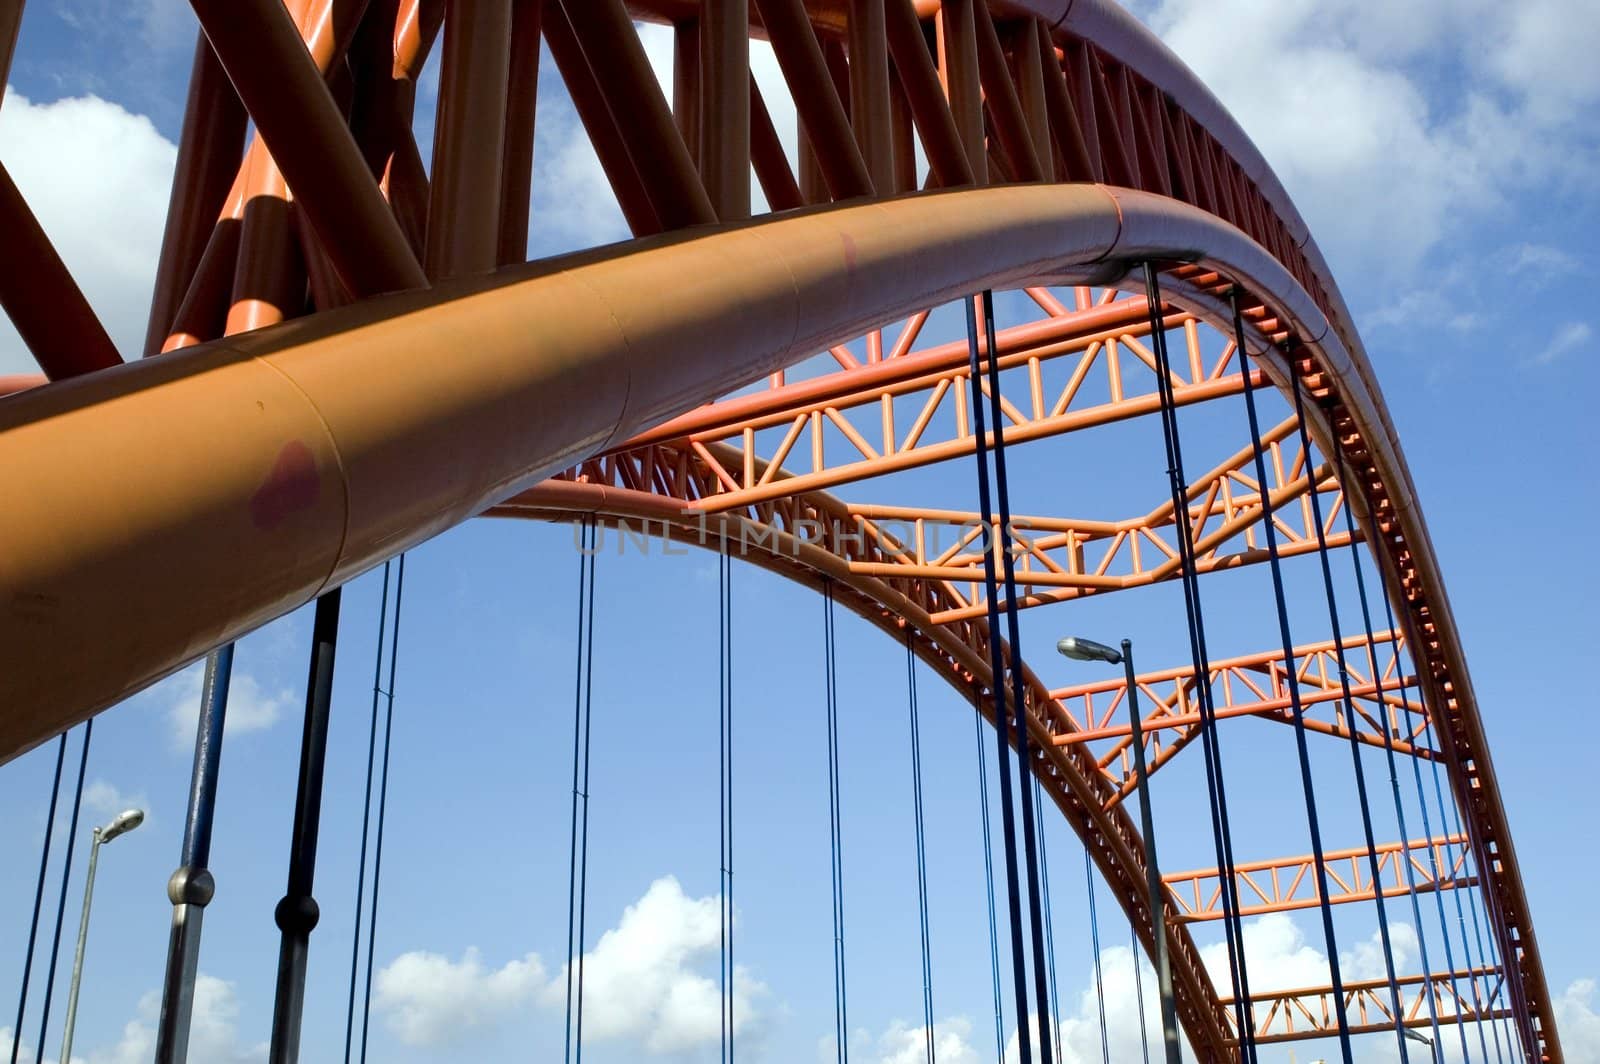 Original orange bridge structure with blue sky and clouds as bacground.